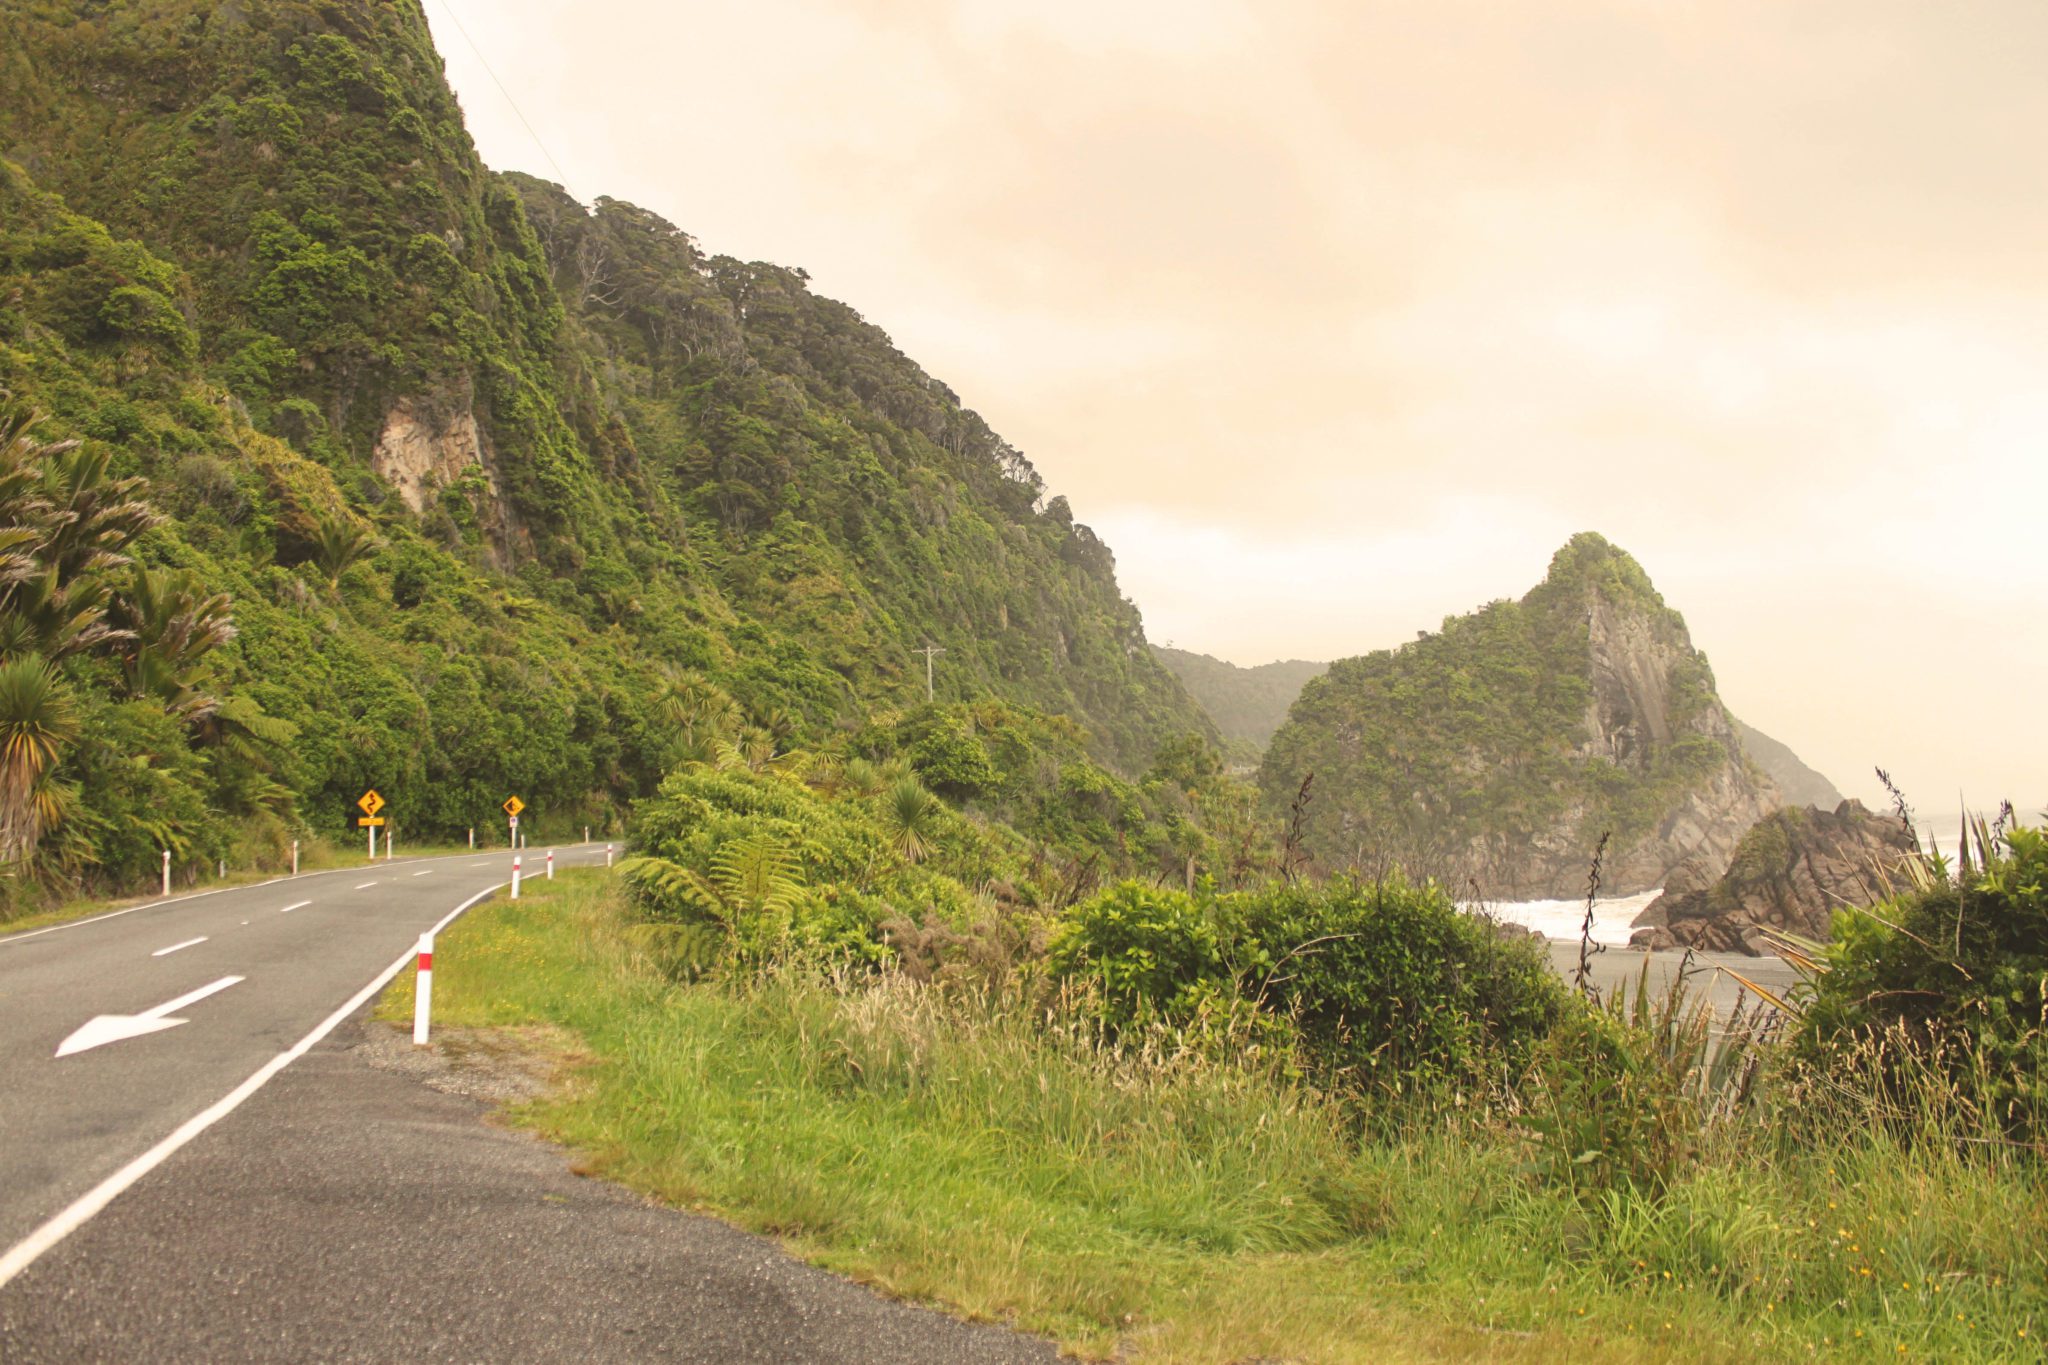 New Zealand's Great Coast road is ranked as one of the top 10 most scenic drives in the world- 11 things to see on New Zealand's West Coast #newzealand #westcoast #greatcoastroad